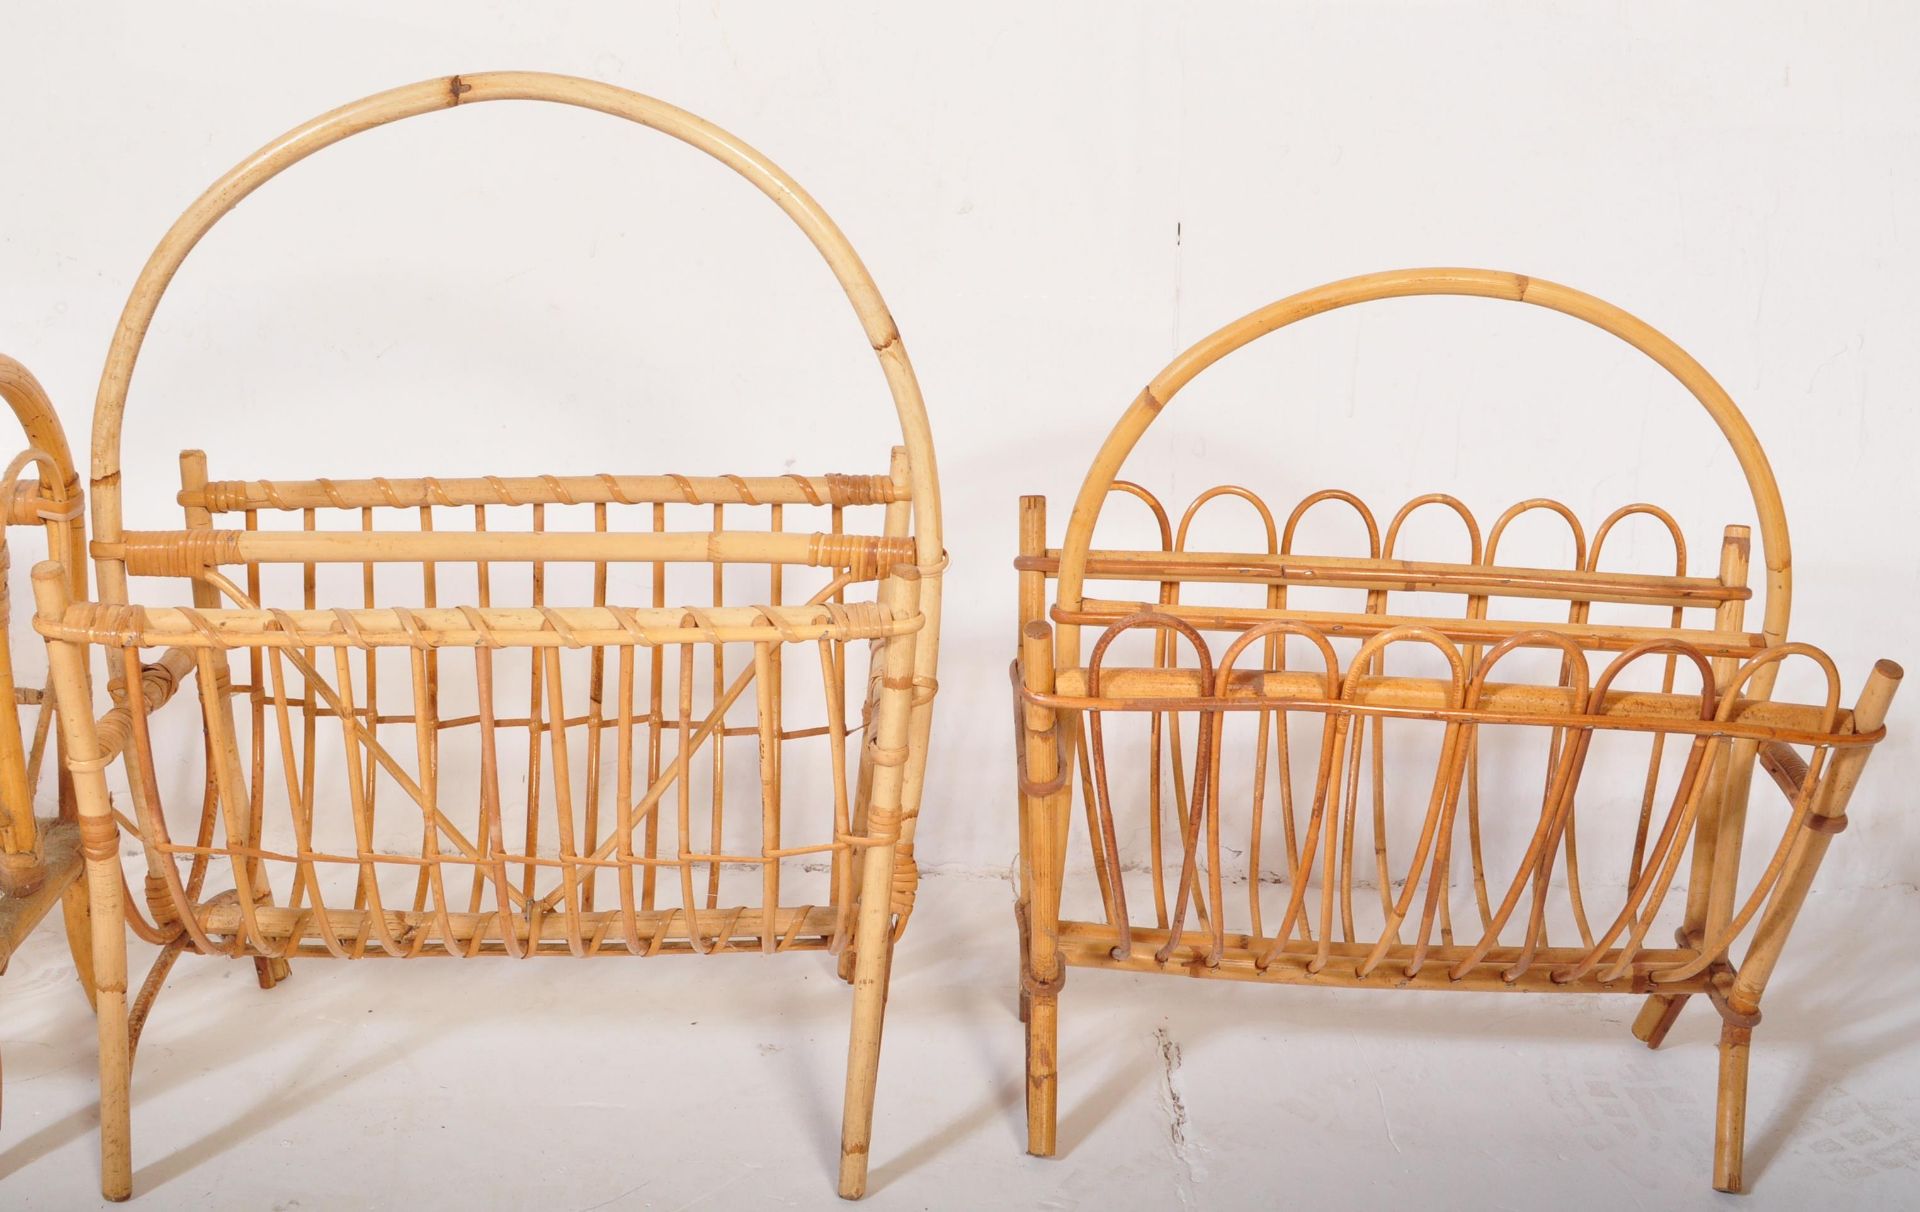 ASSORTMENT OF 1970S BAMBOO - SIDE TABLE - MAGAZINE RACK - Image 5 of 5